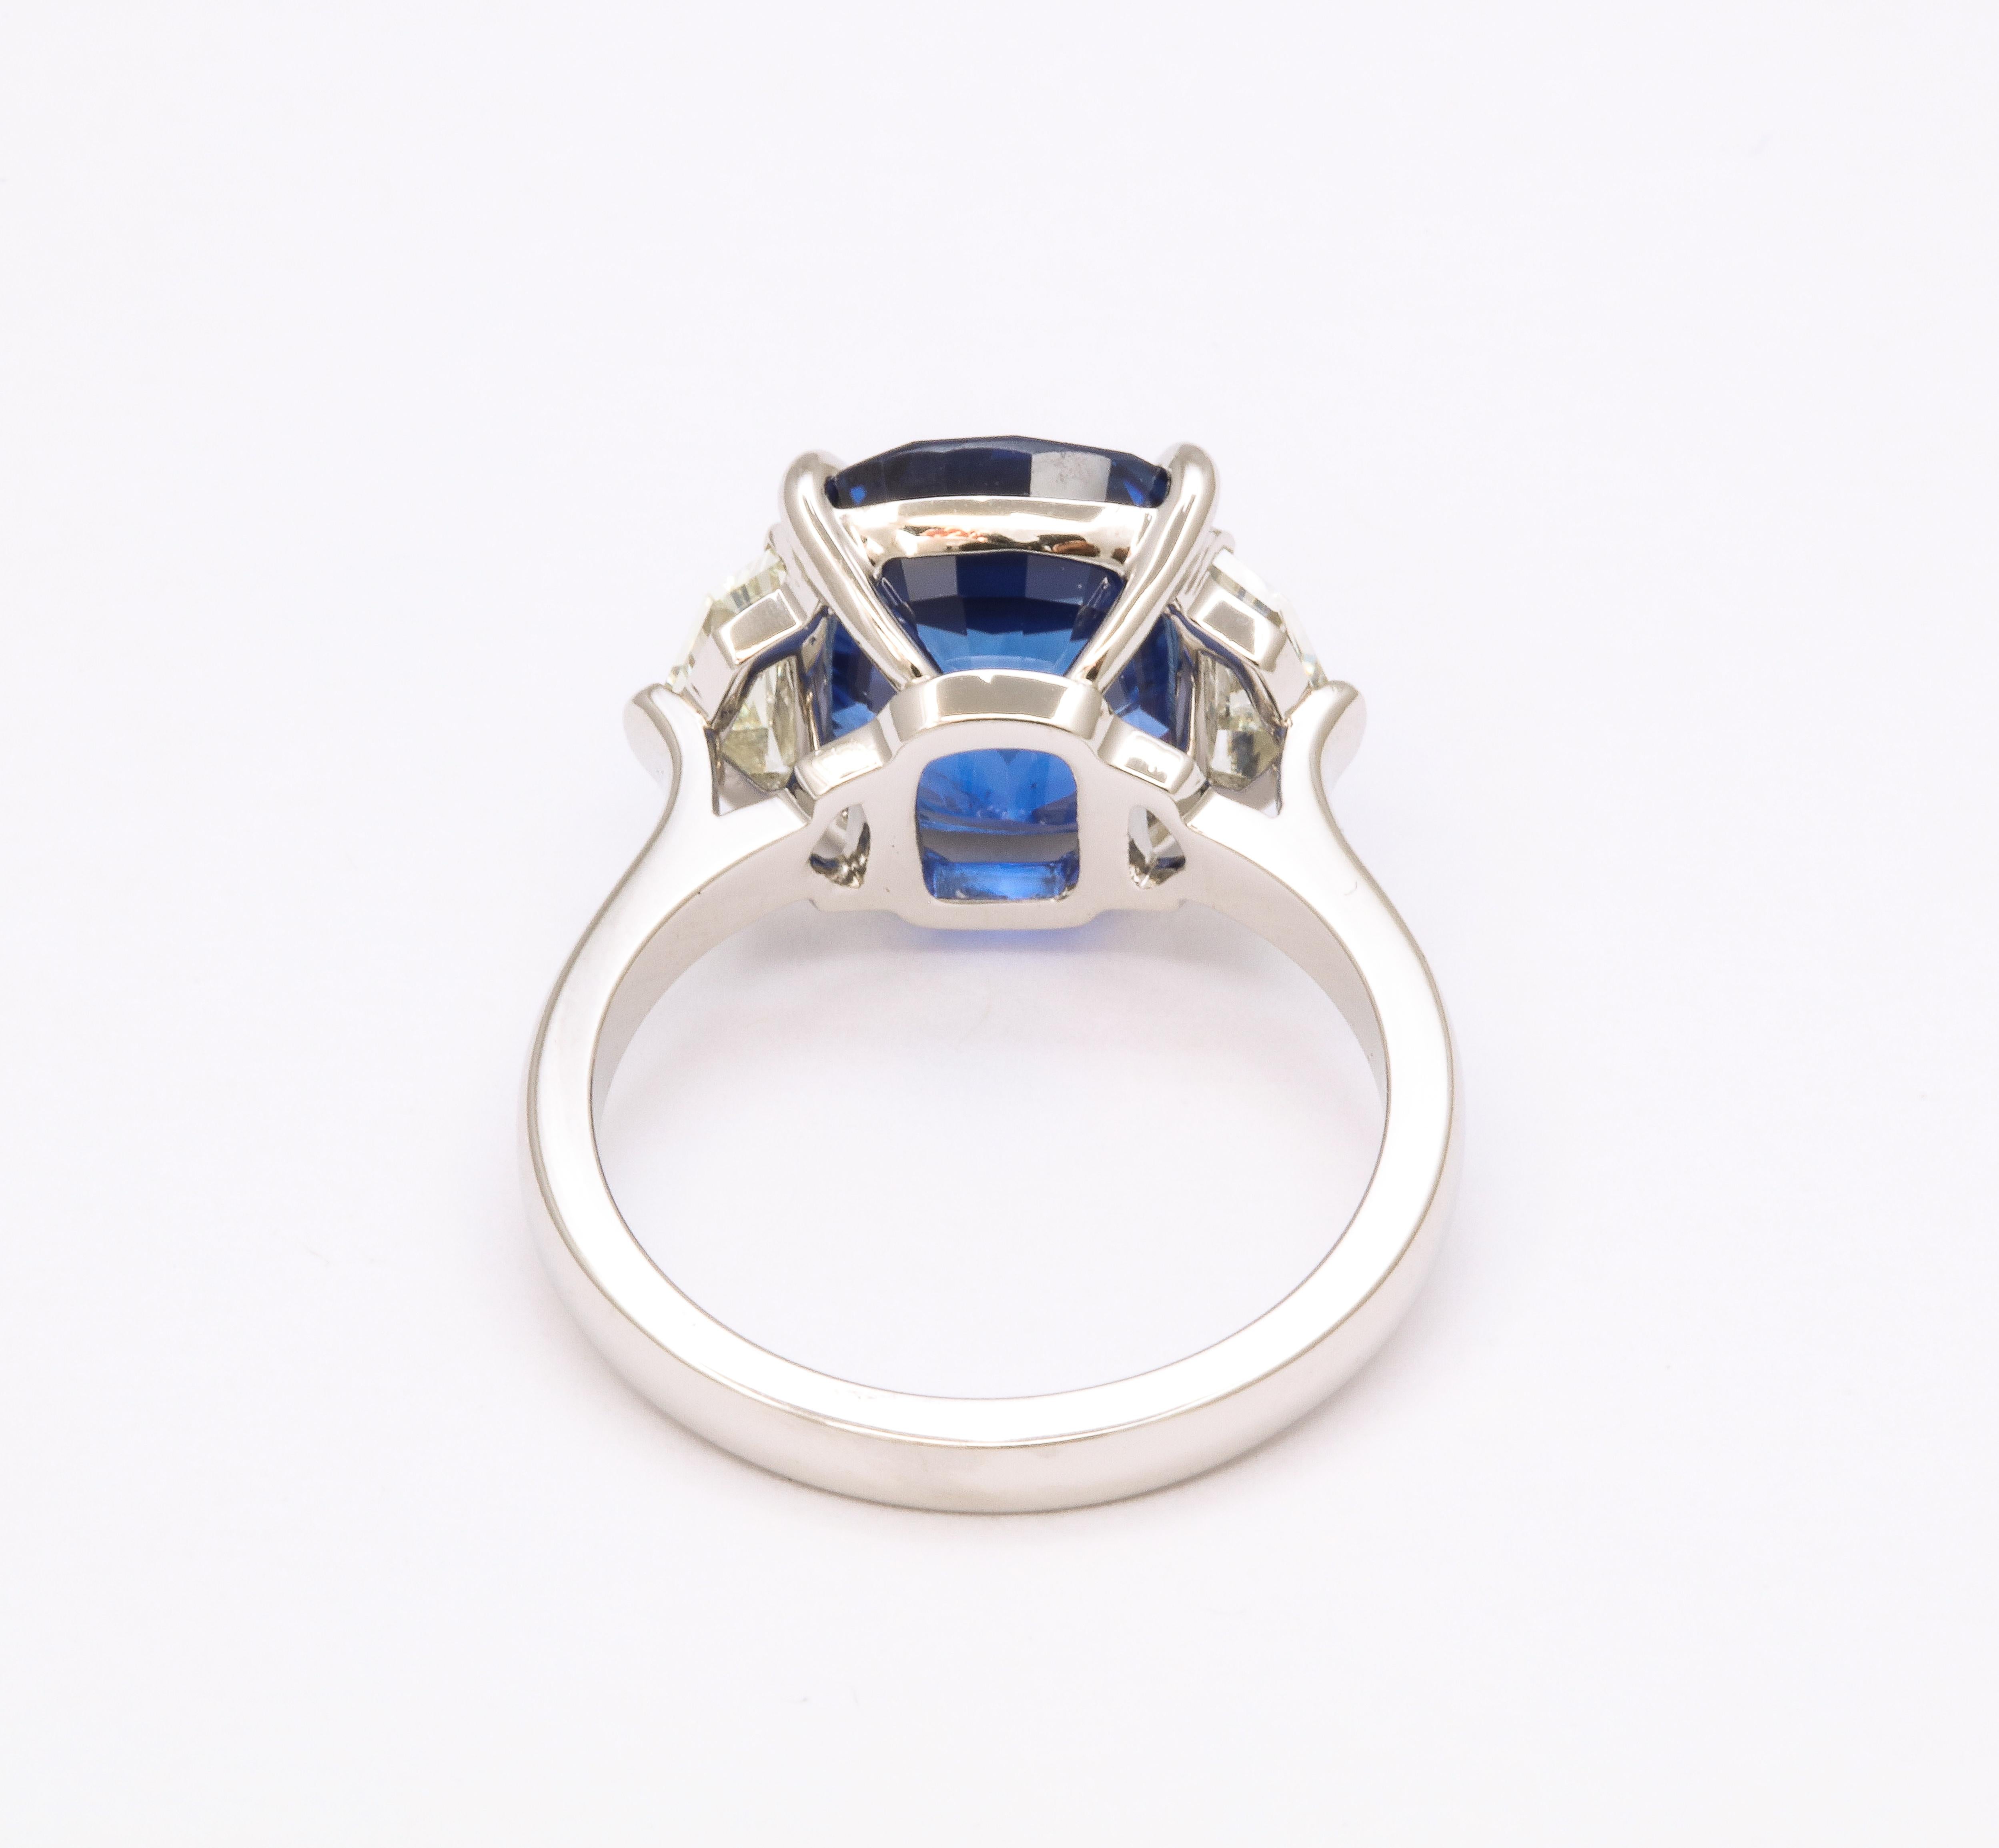 7 Carat Cushion Cut Sapphire and Diamond Ring For Sale 3